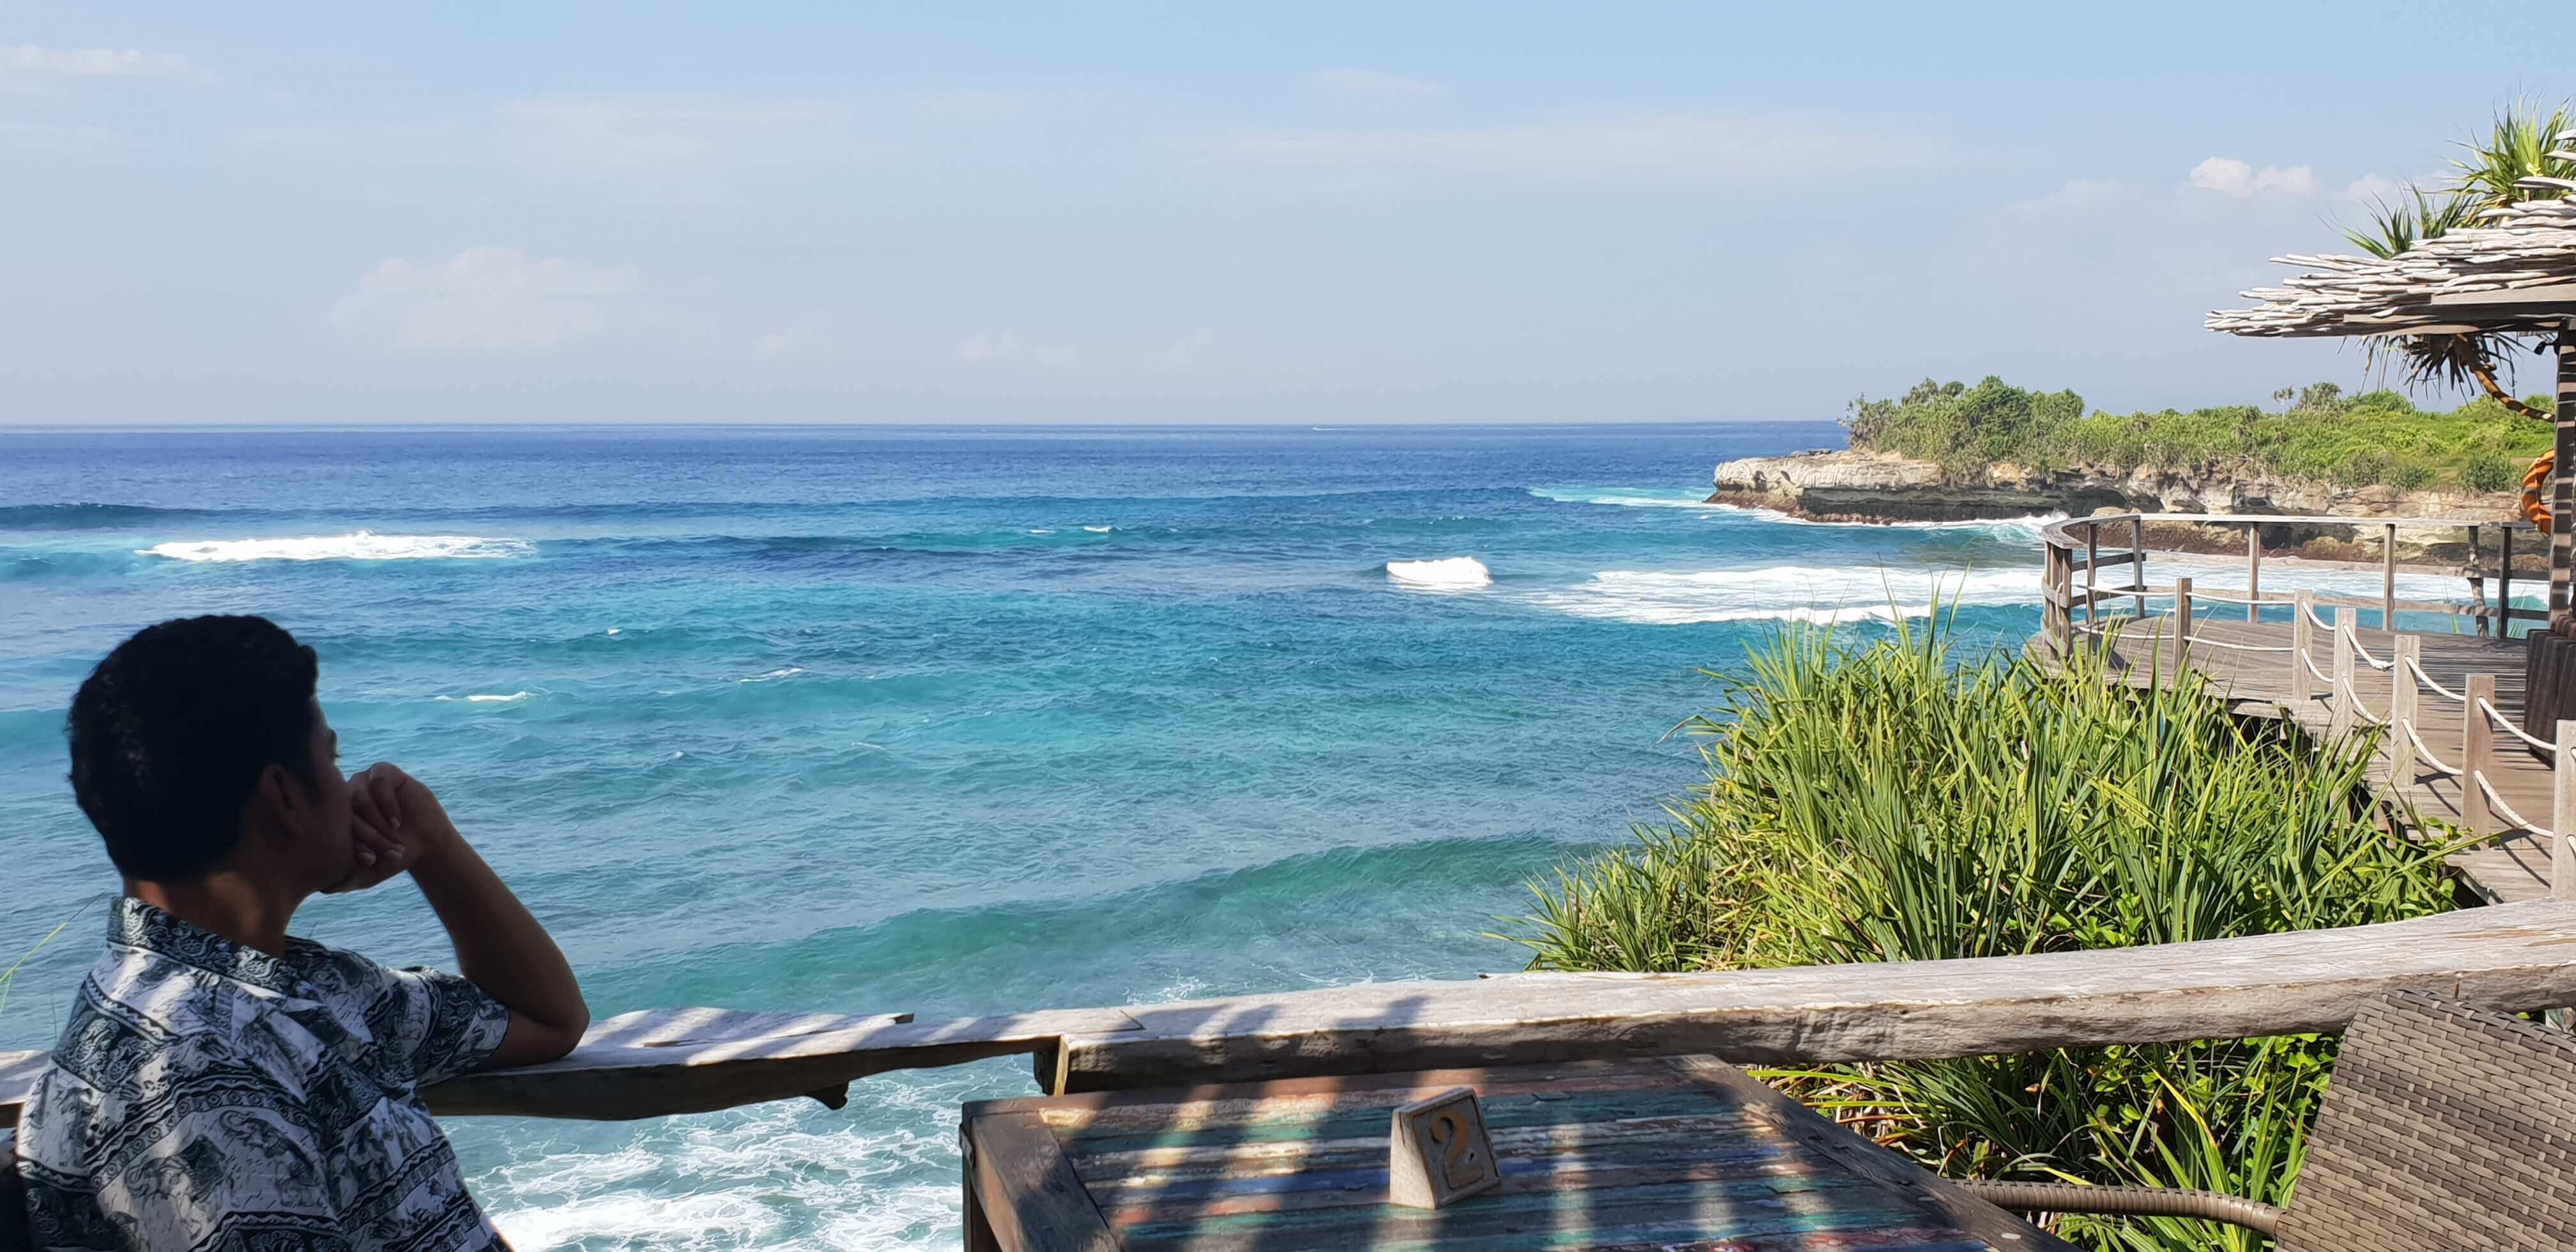 Bali is a traveller's dream and offers the perfect combo of nature & culture